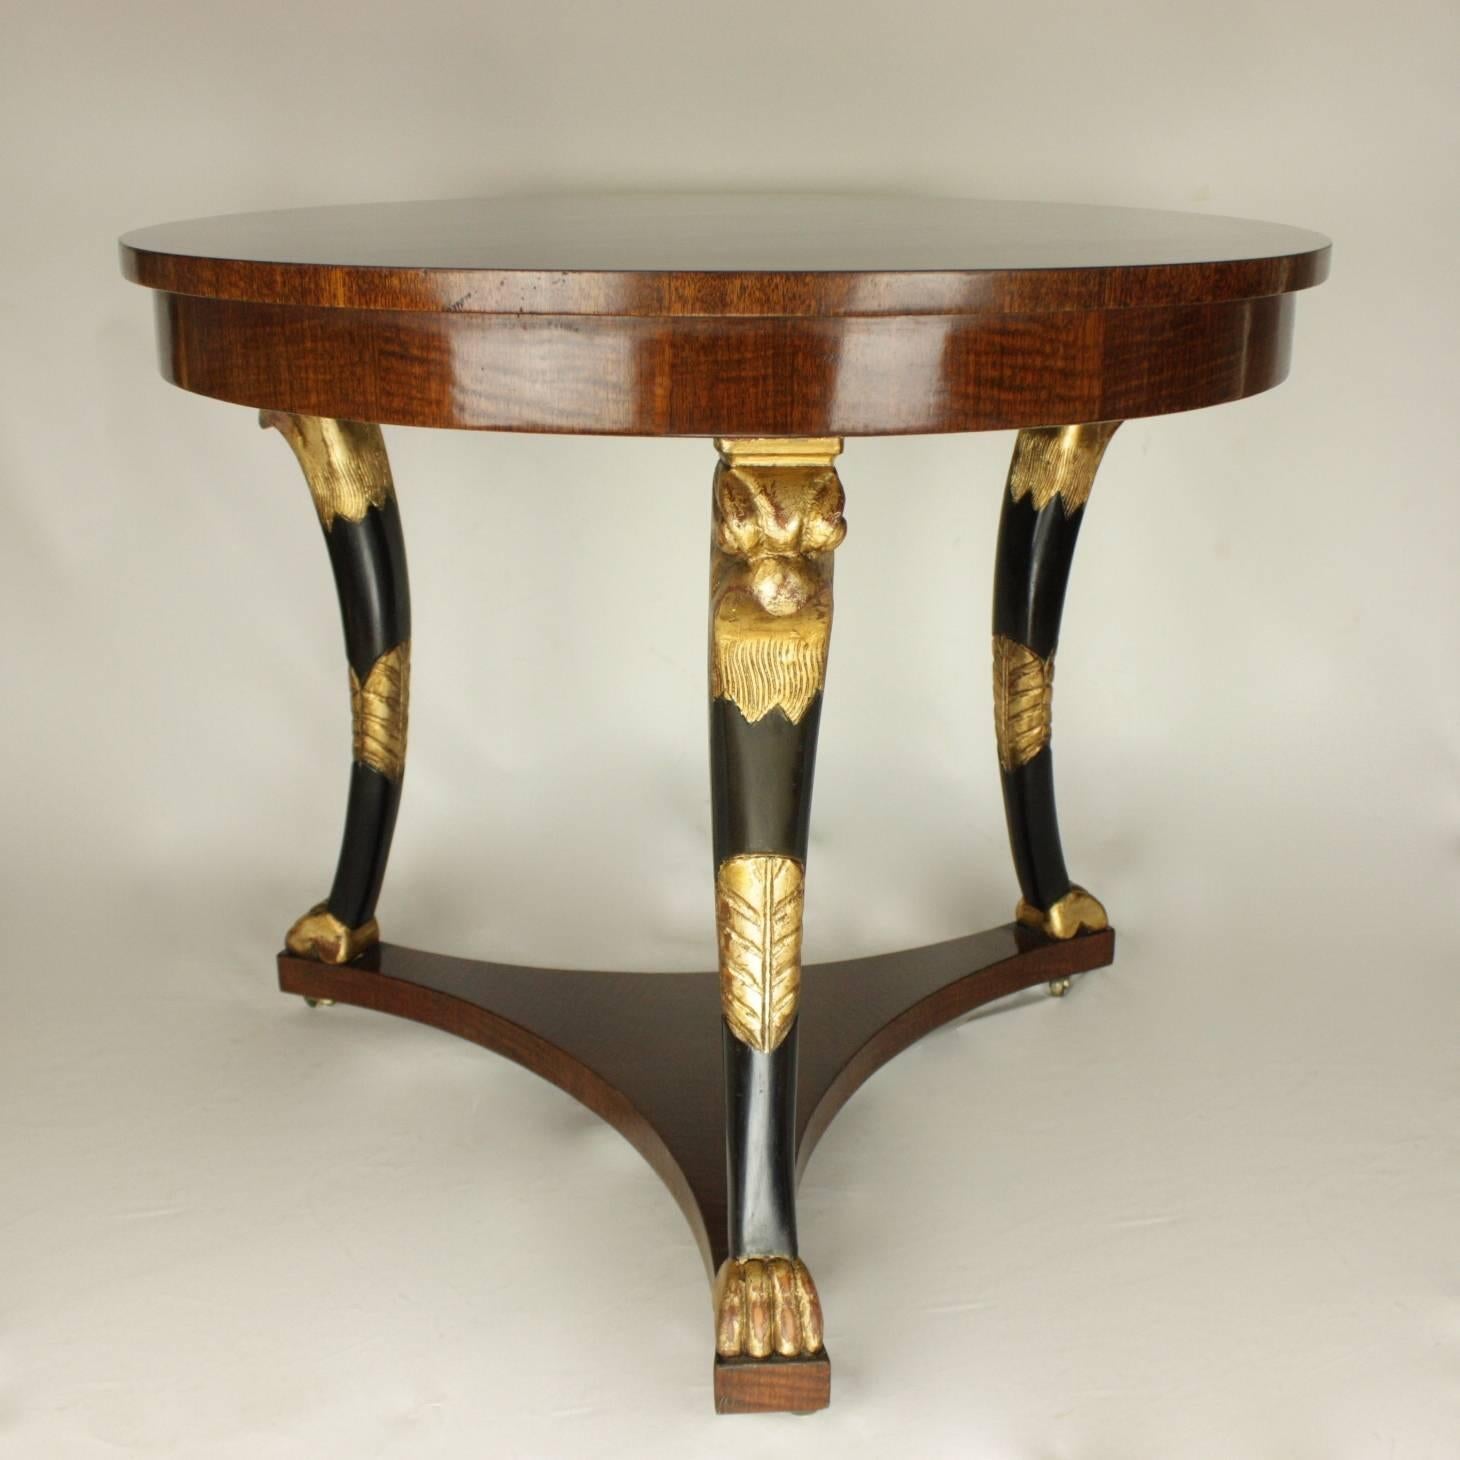 Late 19th century Empire style centre table with an eye-catching mahogany veneered tabletop and horus headed giltwood and ebonized legs. Horus is one of the most significant ancient Egyptian deities - he was the divine representation of the living